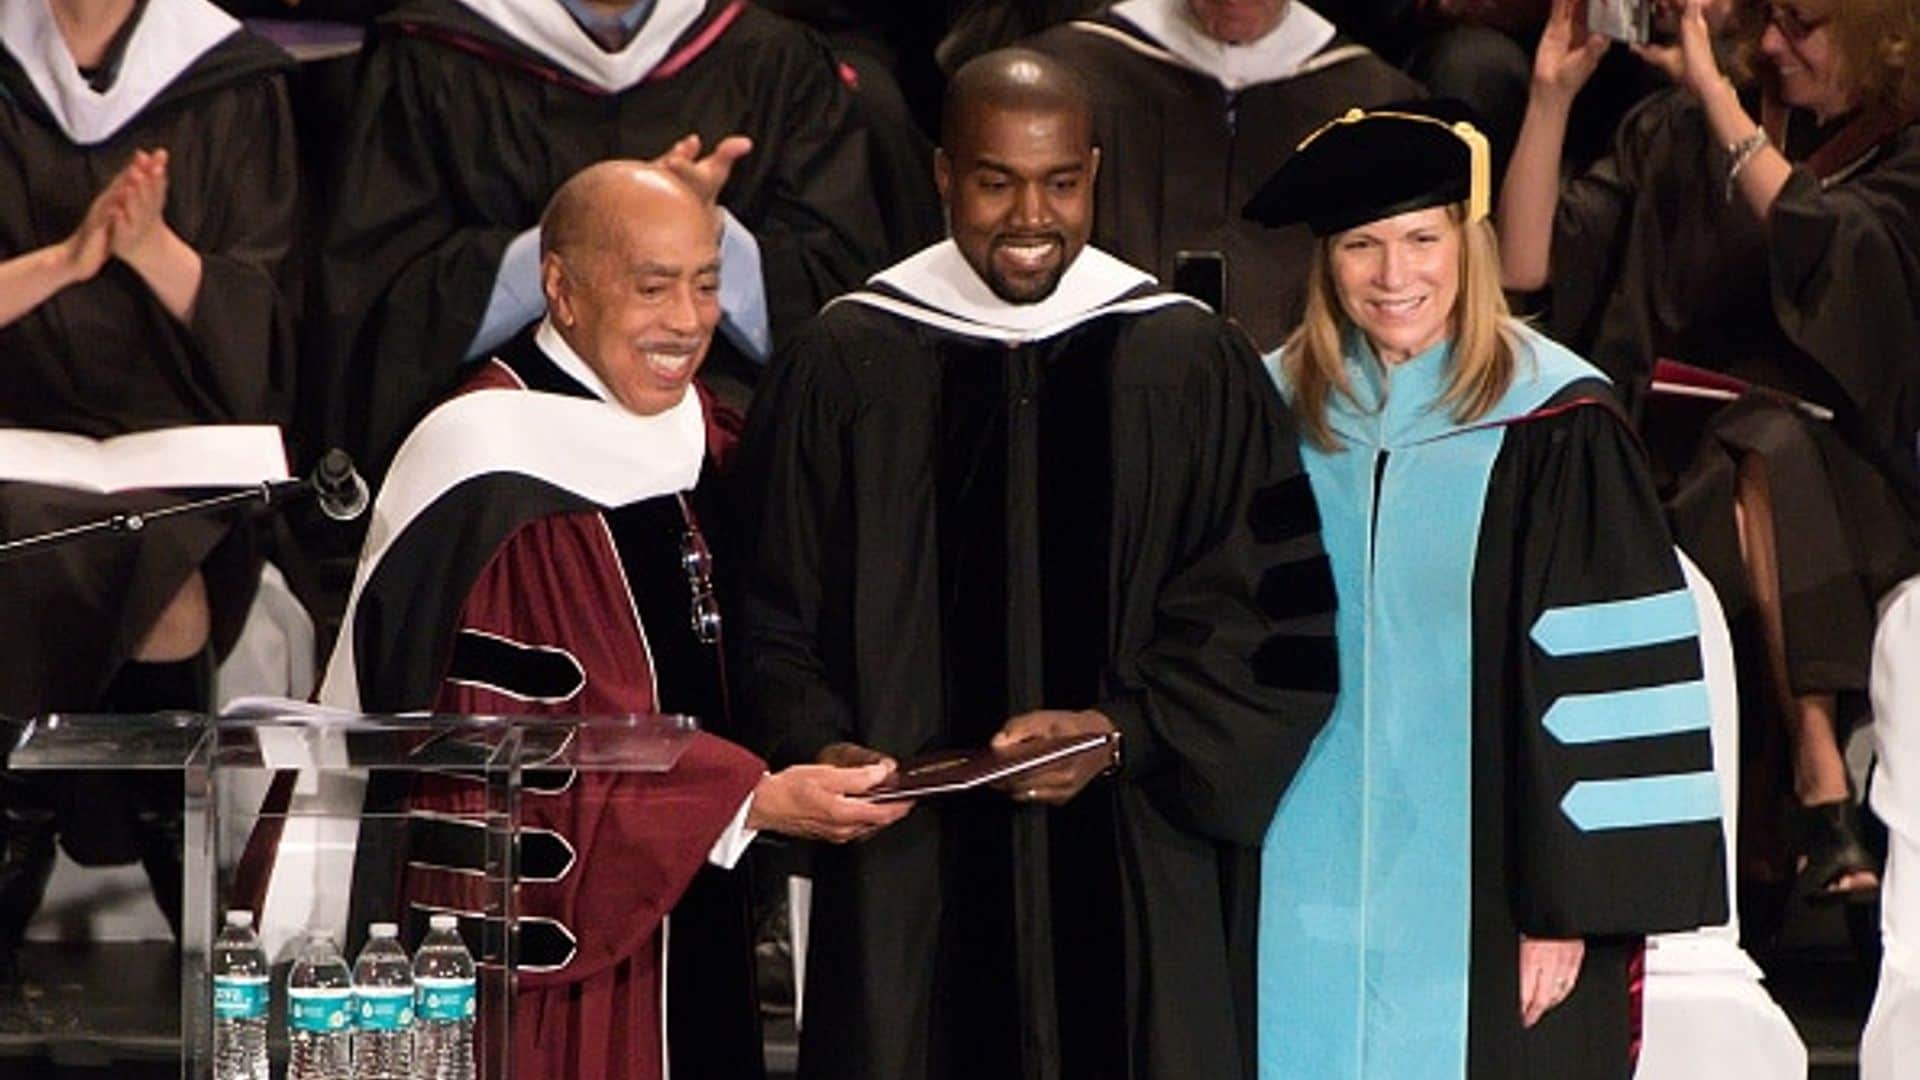 College dropout Kanye West receives honorary doctorate in Chicago